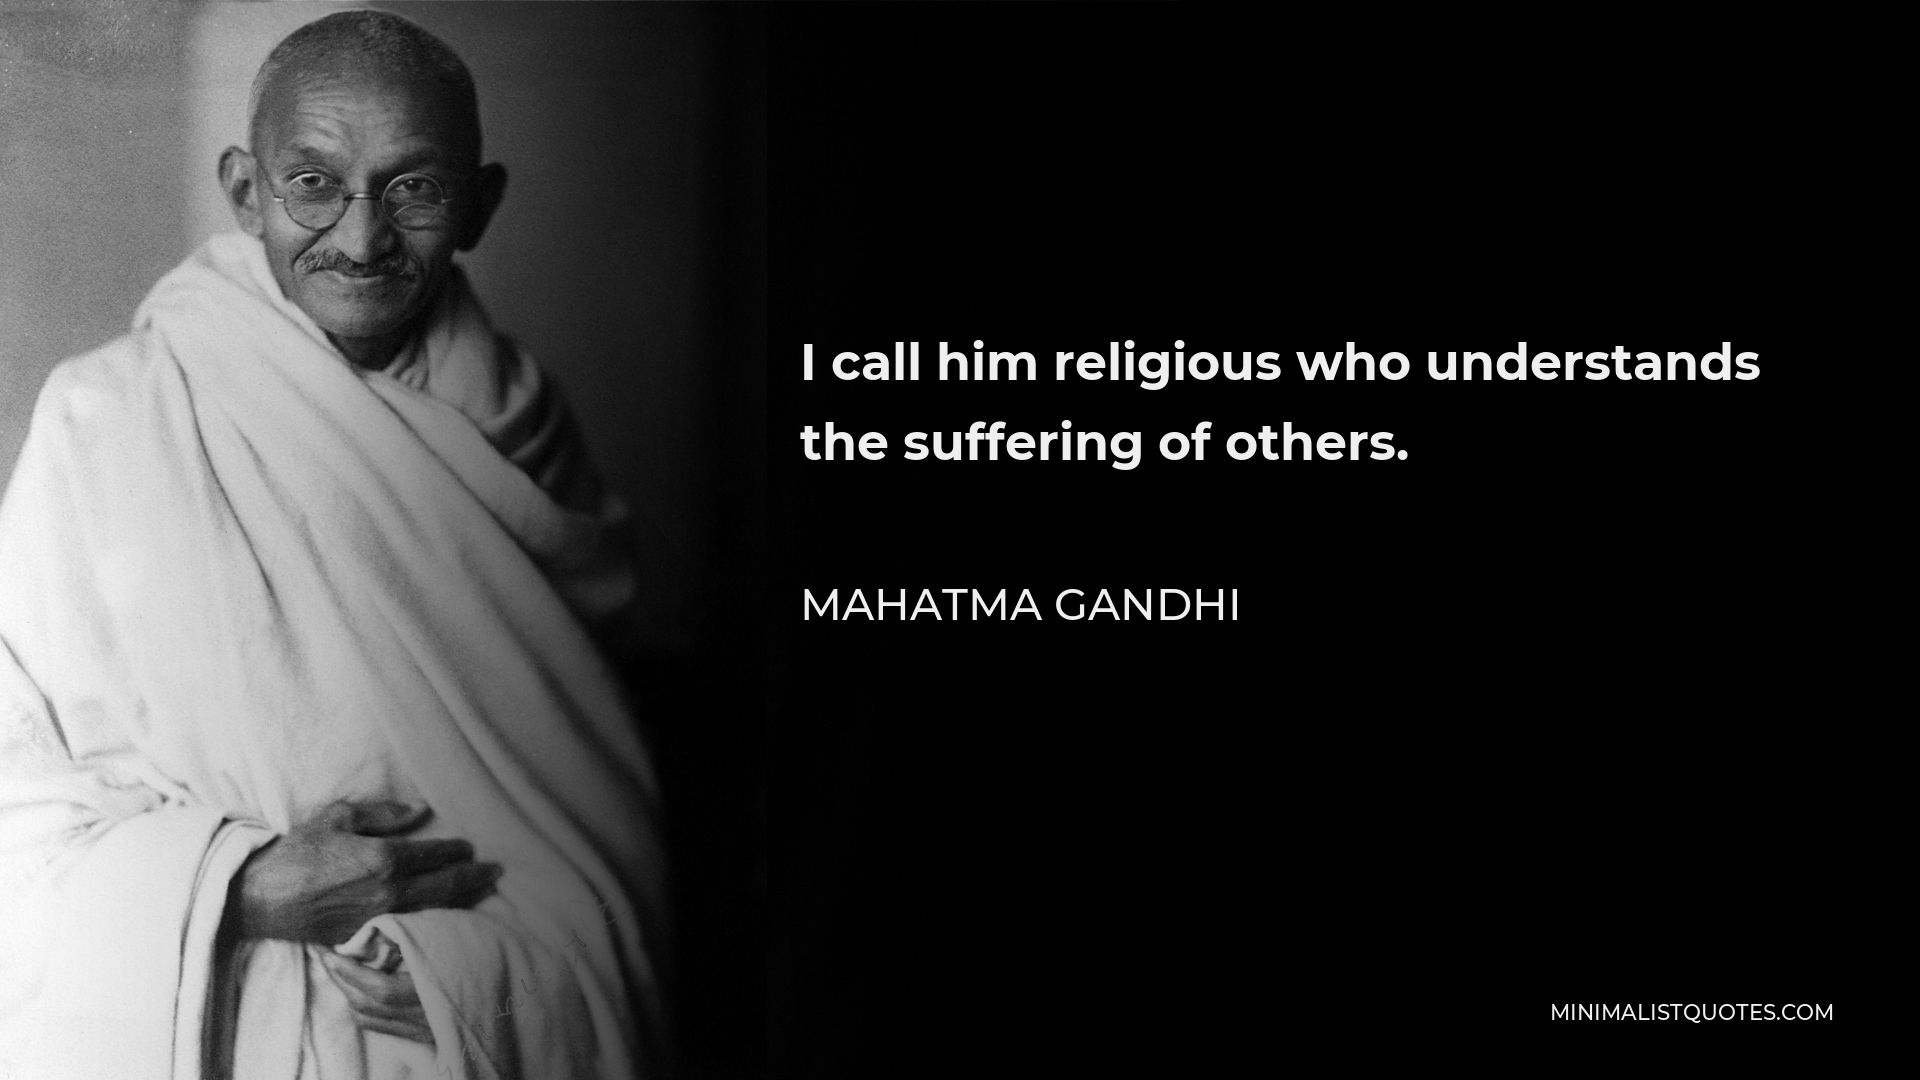 Mahatma Gandhi Quote - I call him religious who understands the suffering of others.